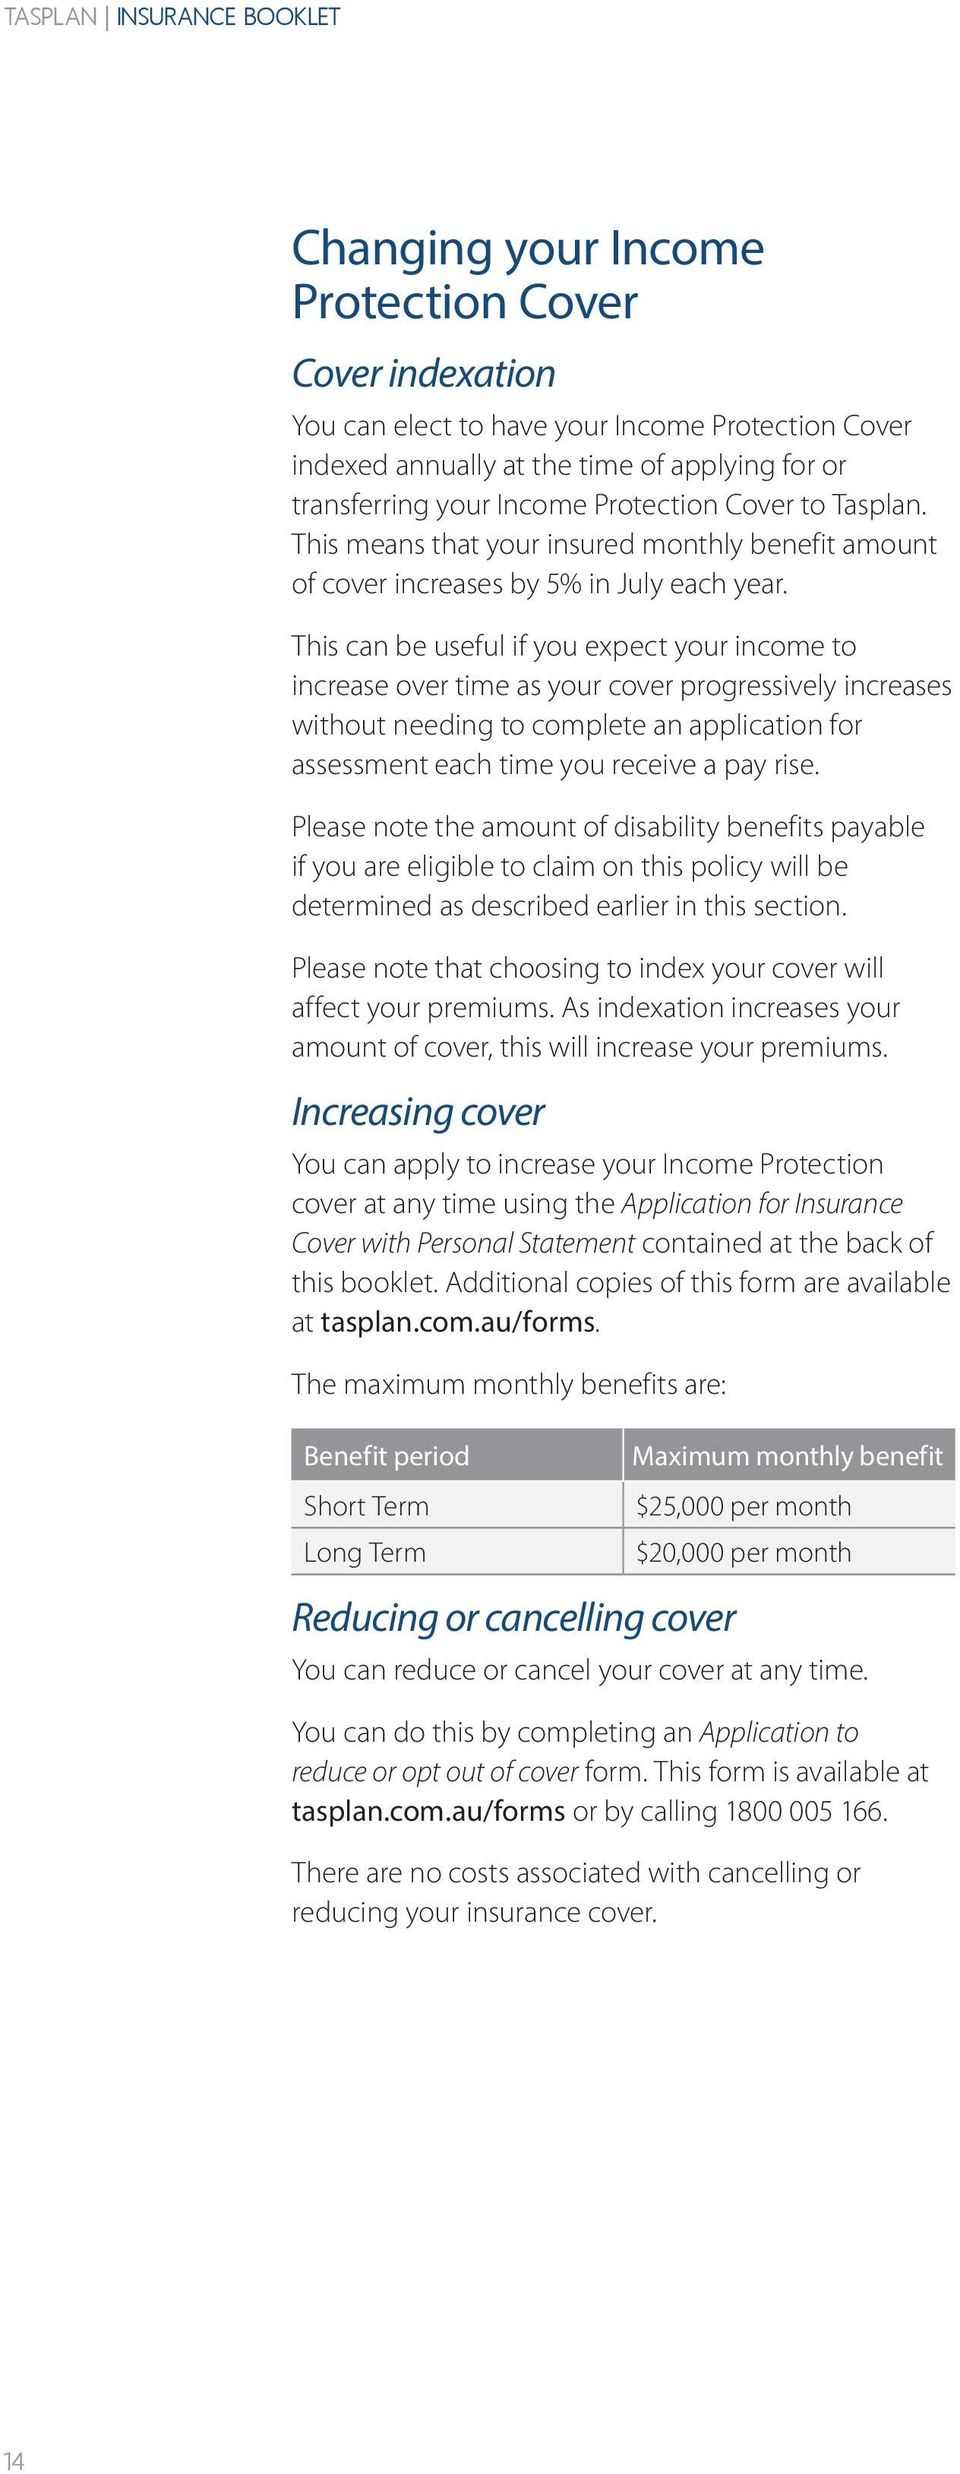 This can be useful if you expect your income to increase over time as your cover progressively increases without needing to complete an application for assessment each time you receive a pay rise.